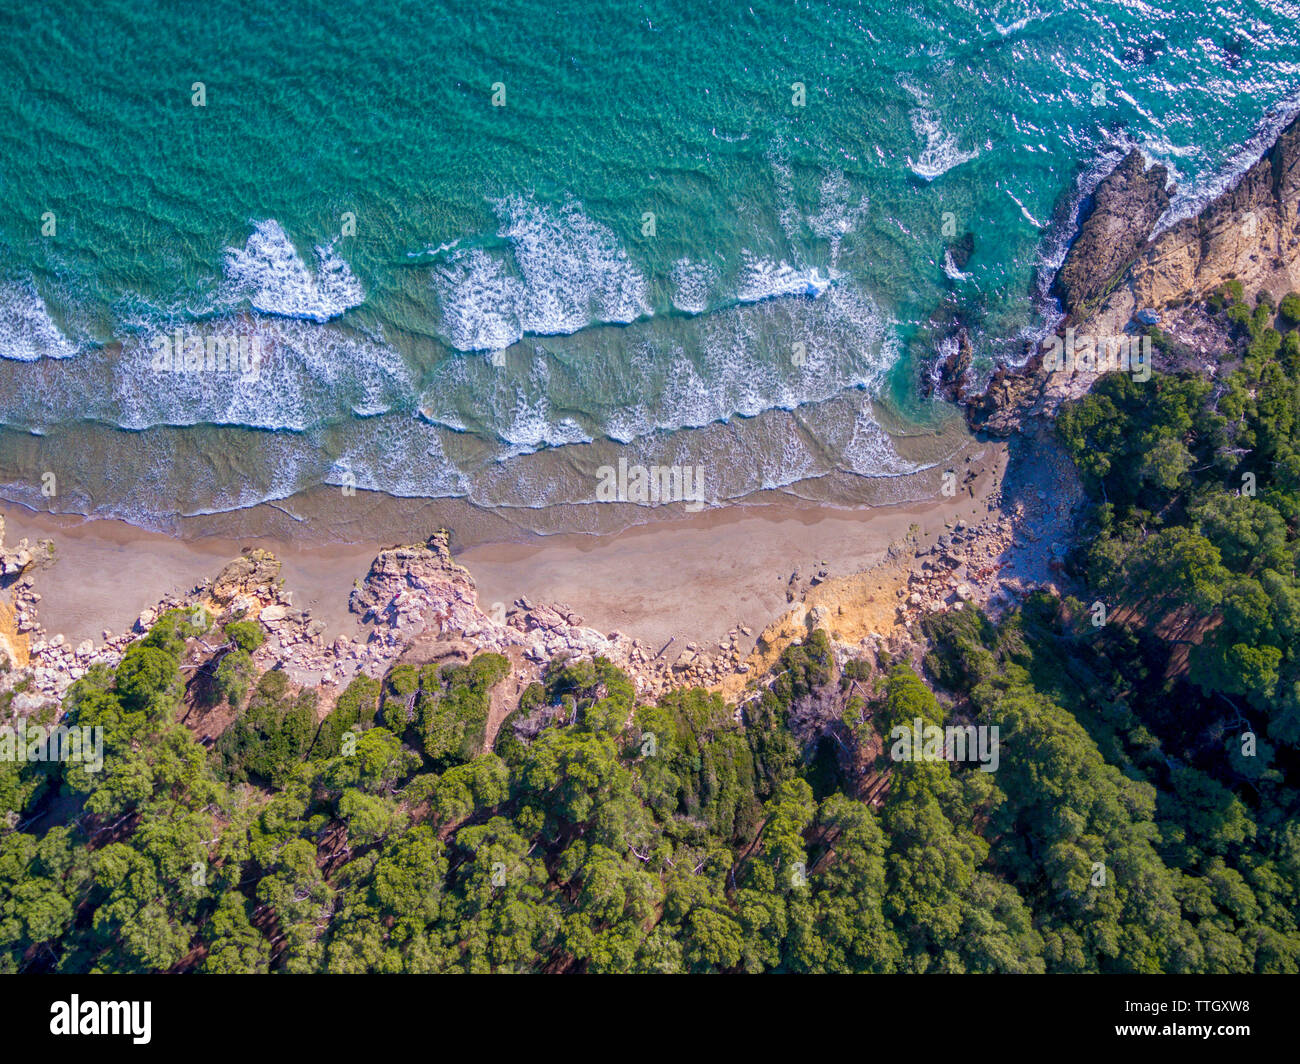 Aerial views of a coastline with waves and rocks in the Mediterranean Stock Photo